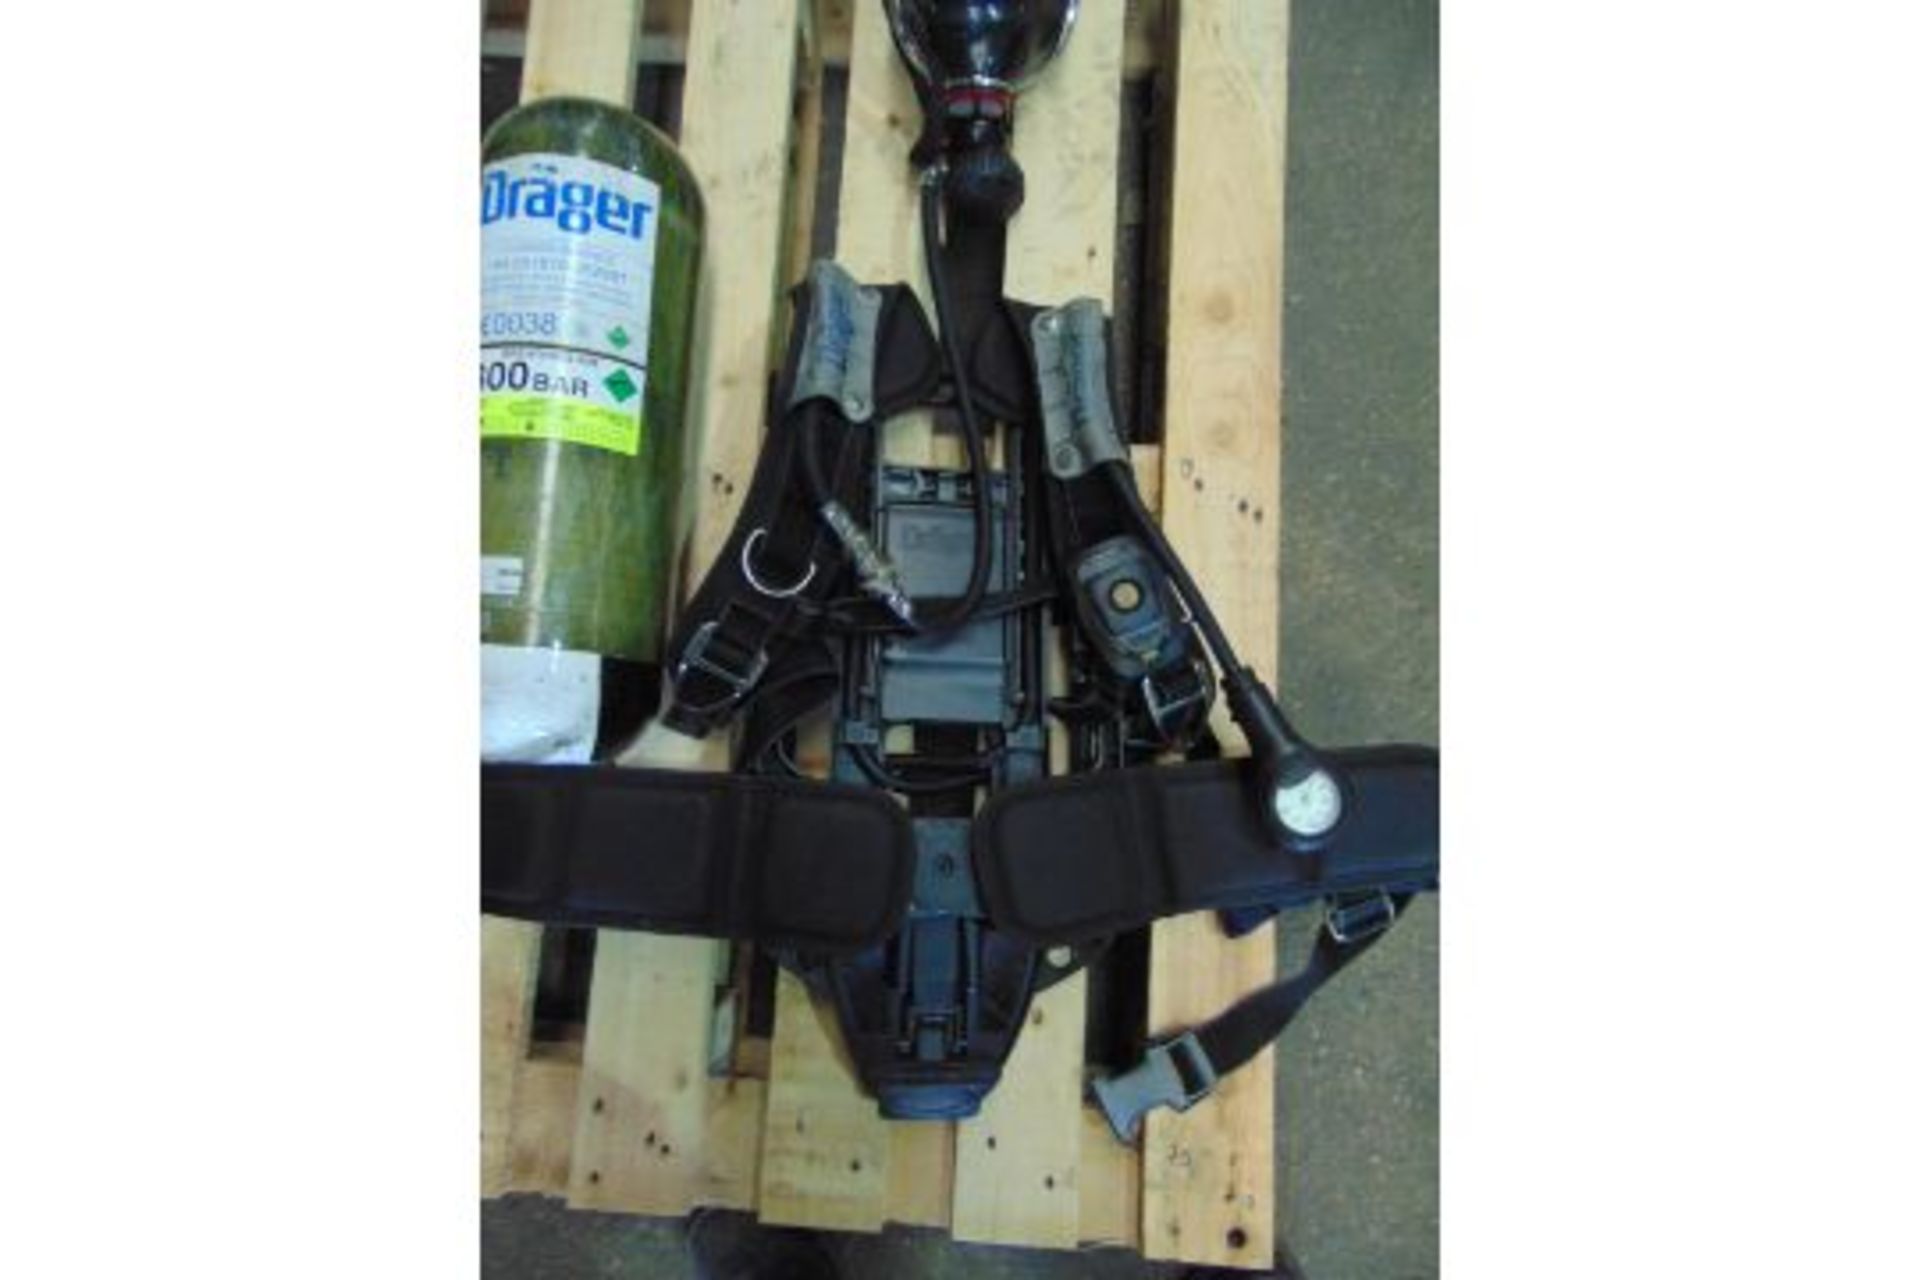 Drager PSS 7000 Self Contained Breathing Apparatus w/ 2 x Drager 300 Bar Air Cylinders - Image 10 of 18